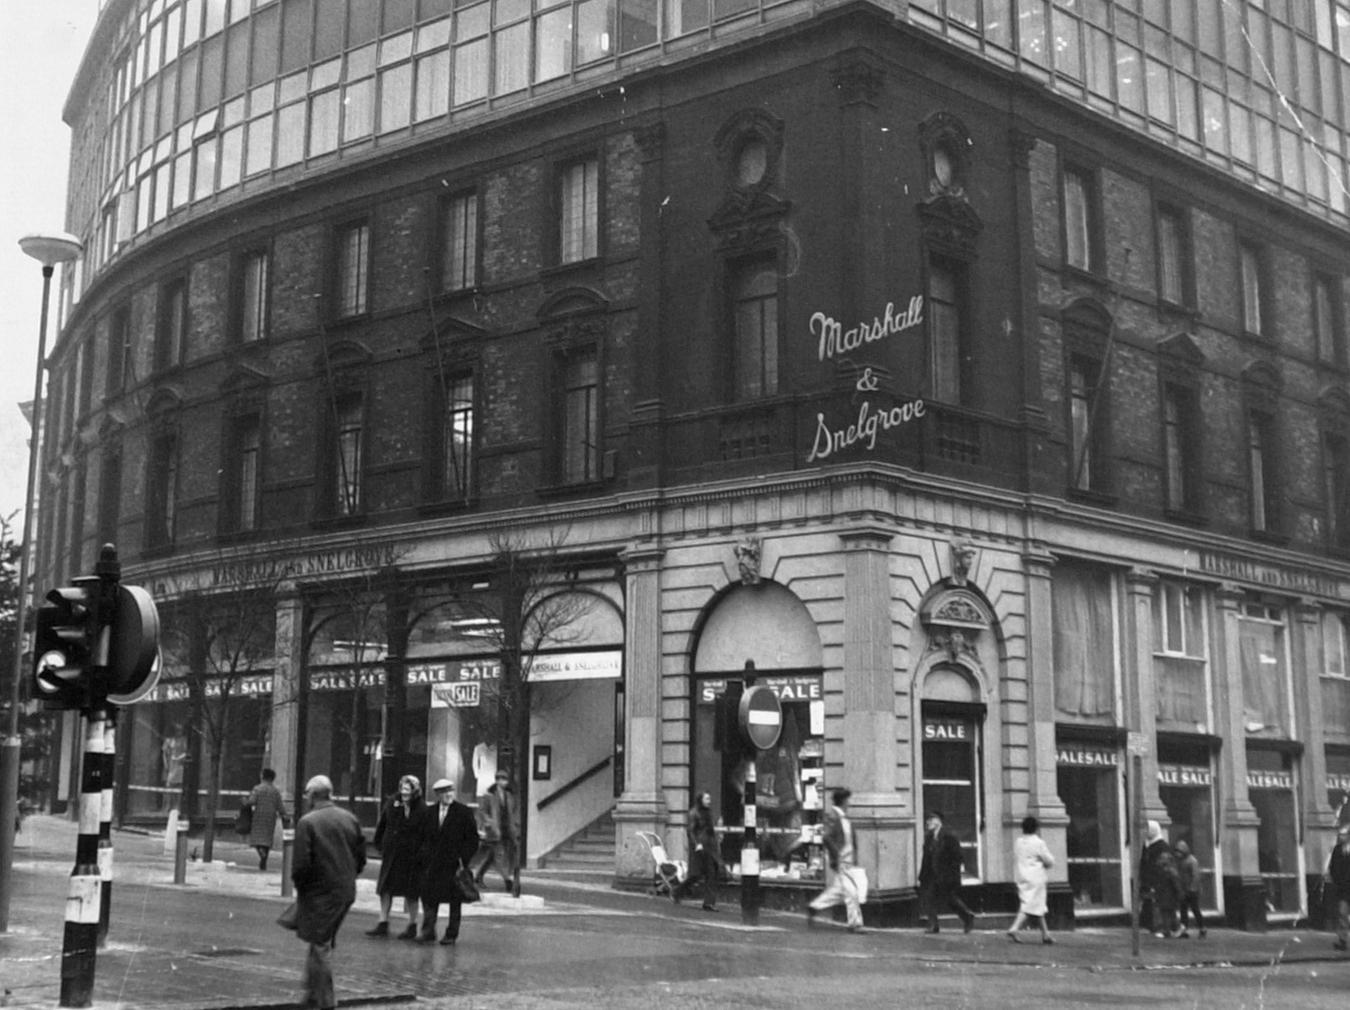 The archetypal department store was founded in 1837 but opened in Leeds in 1870, closing in 1971.